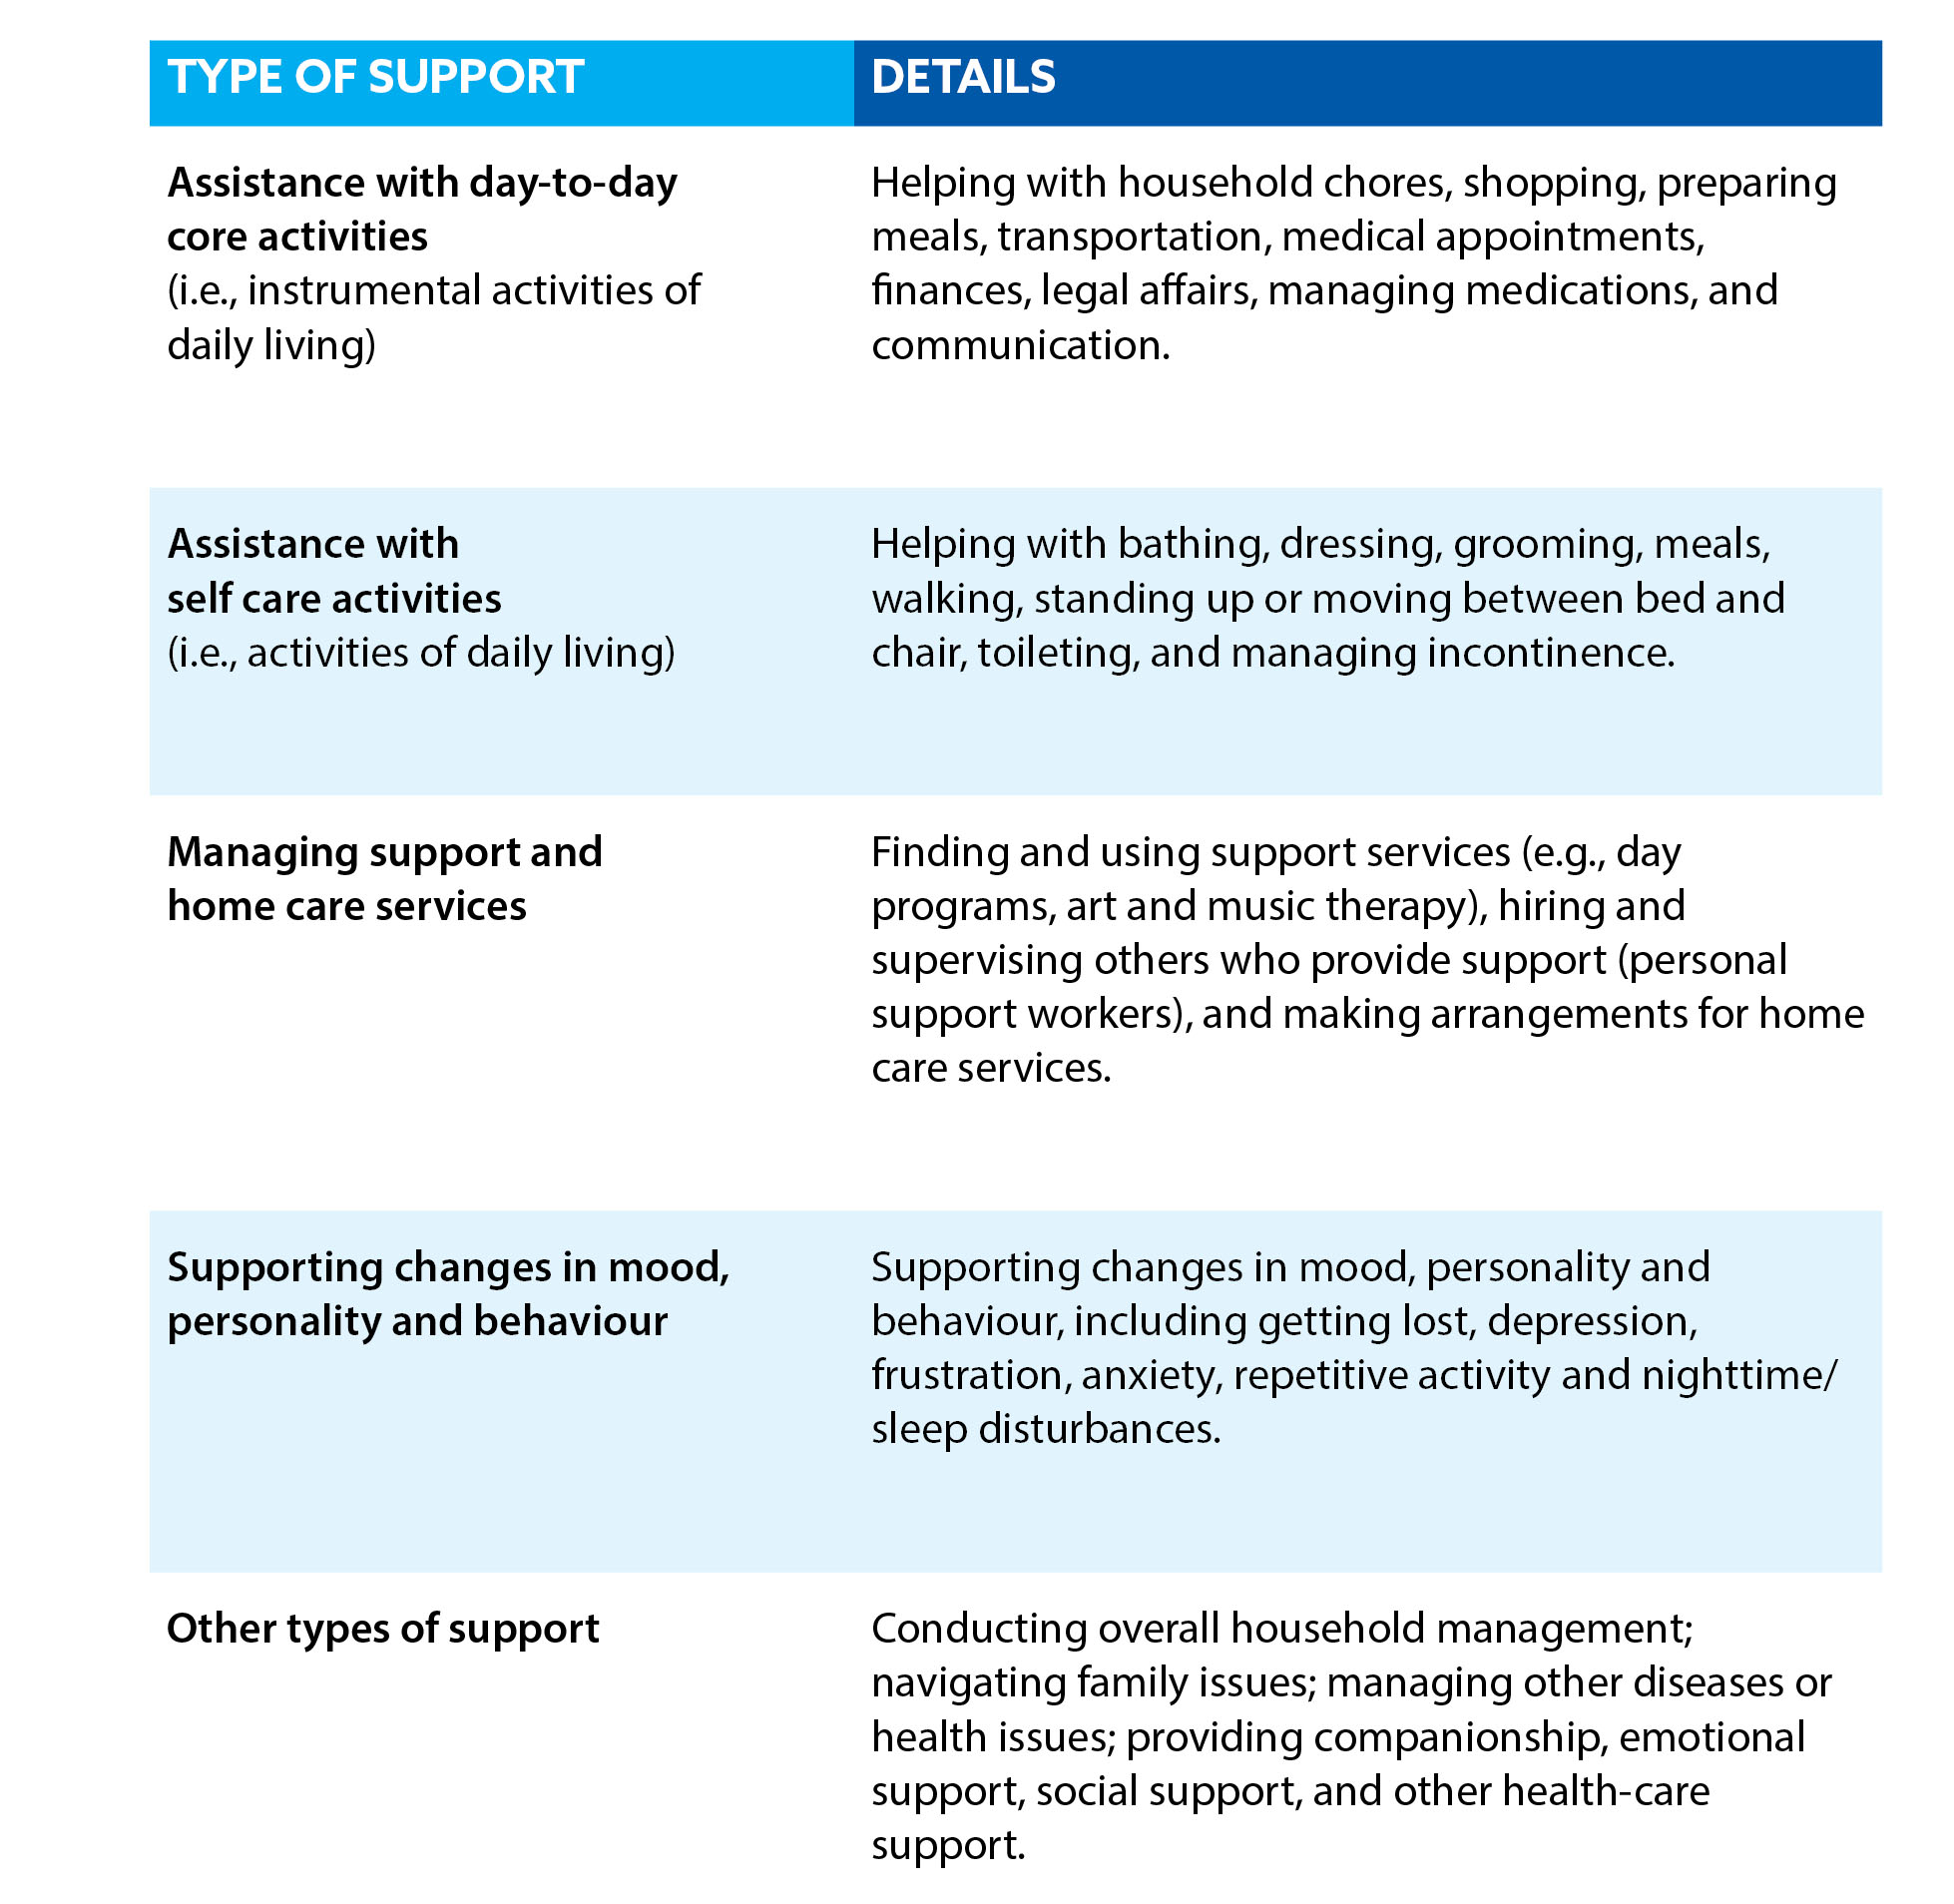 Types of support provided by care partners